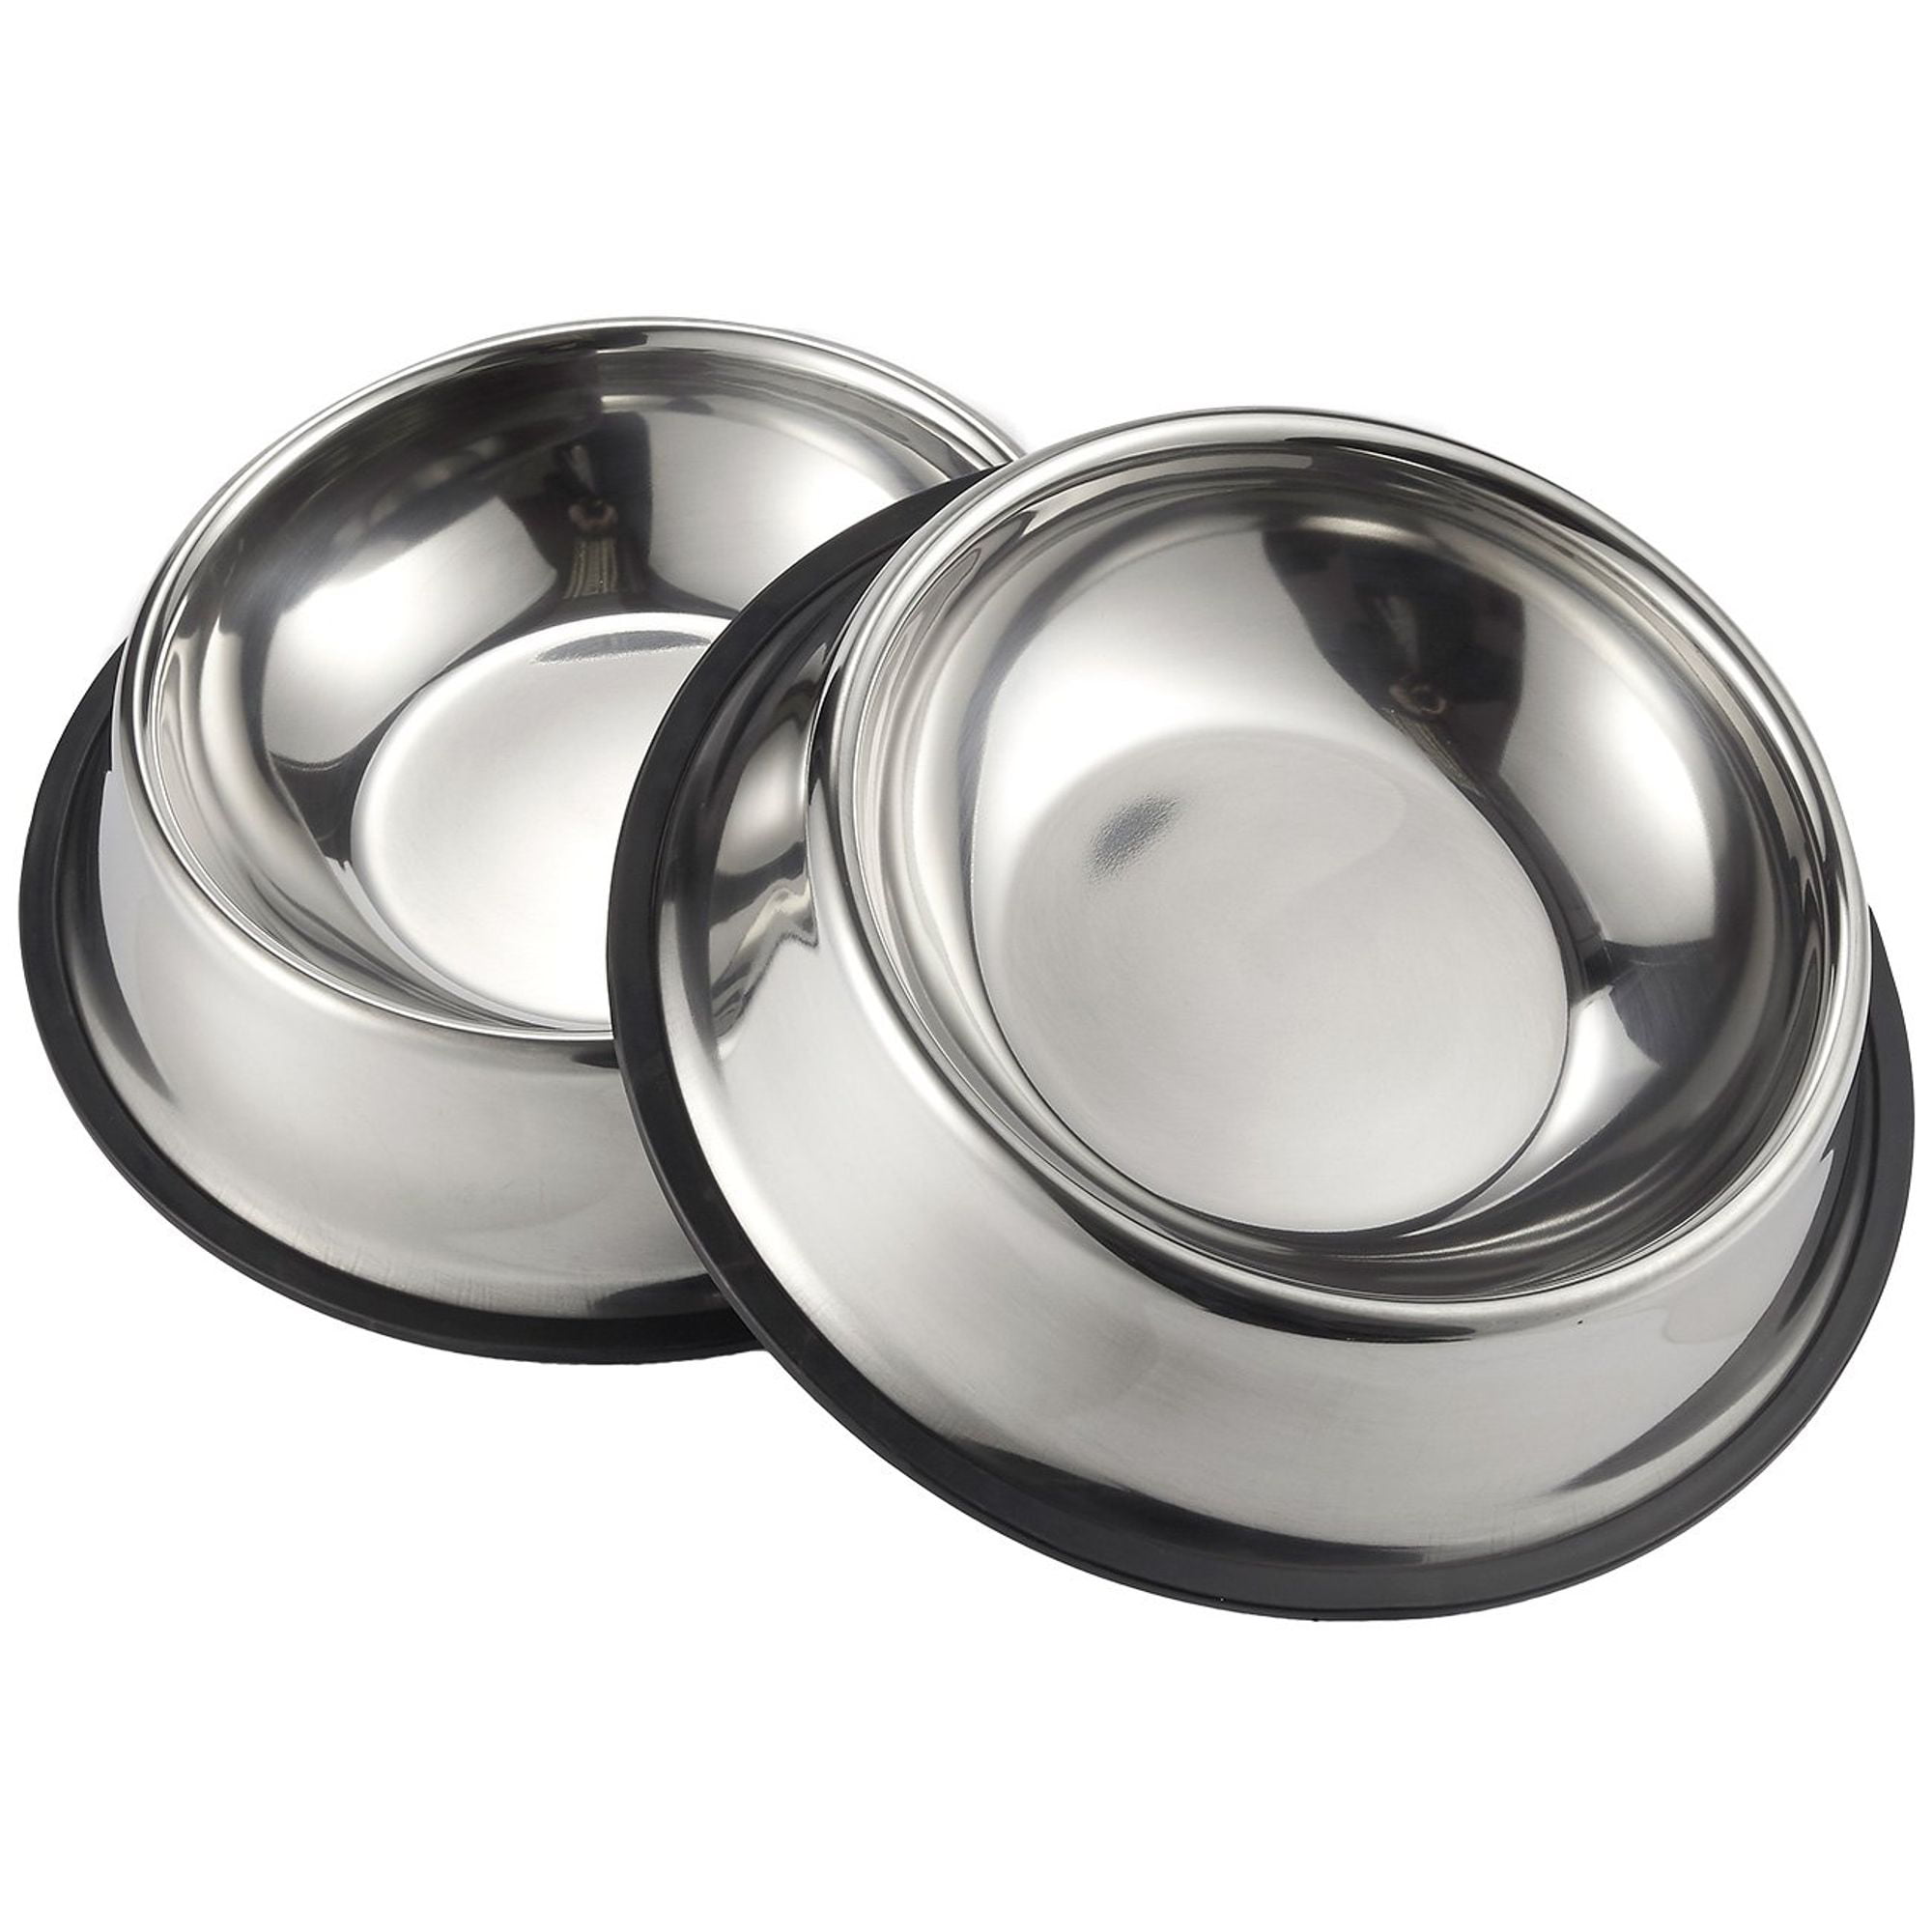 10 Inch Stainless Steel Dog Bowl